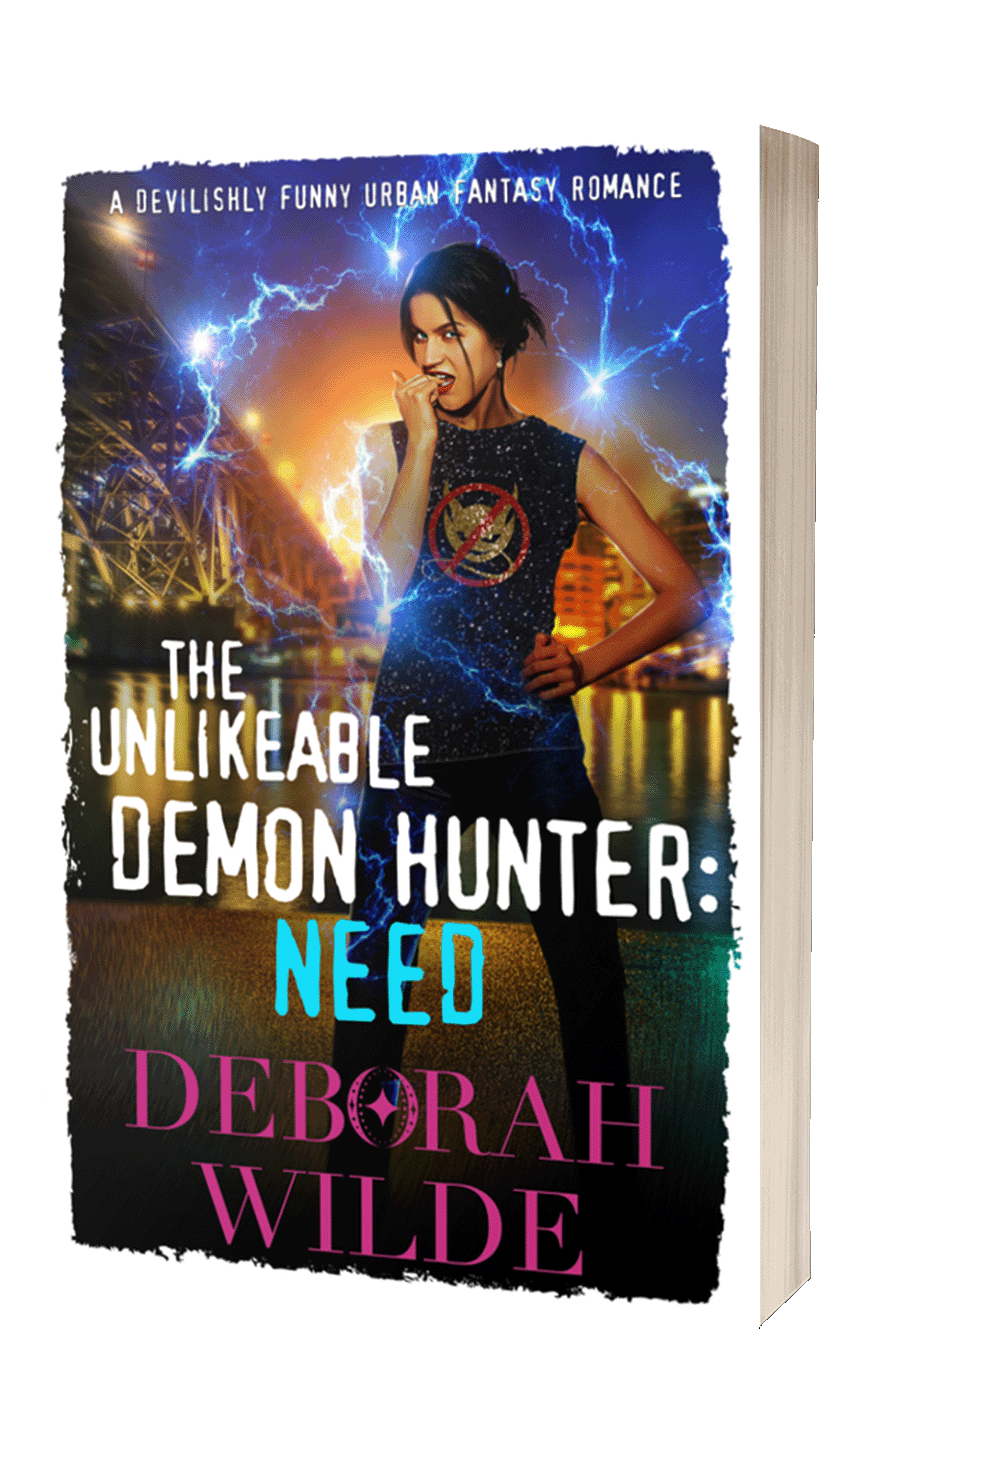 The Unlikeable Demon Hunter:Need, a funny, sexy, urban fantasy from Deborah Wilde.